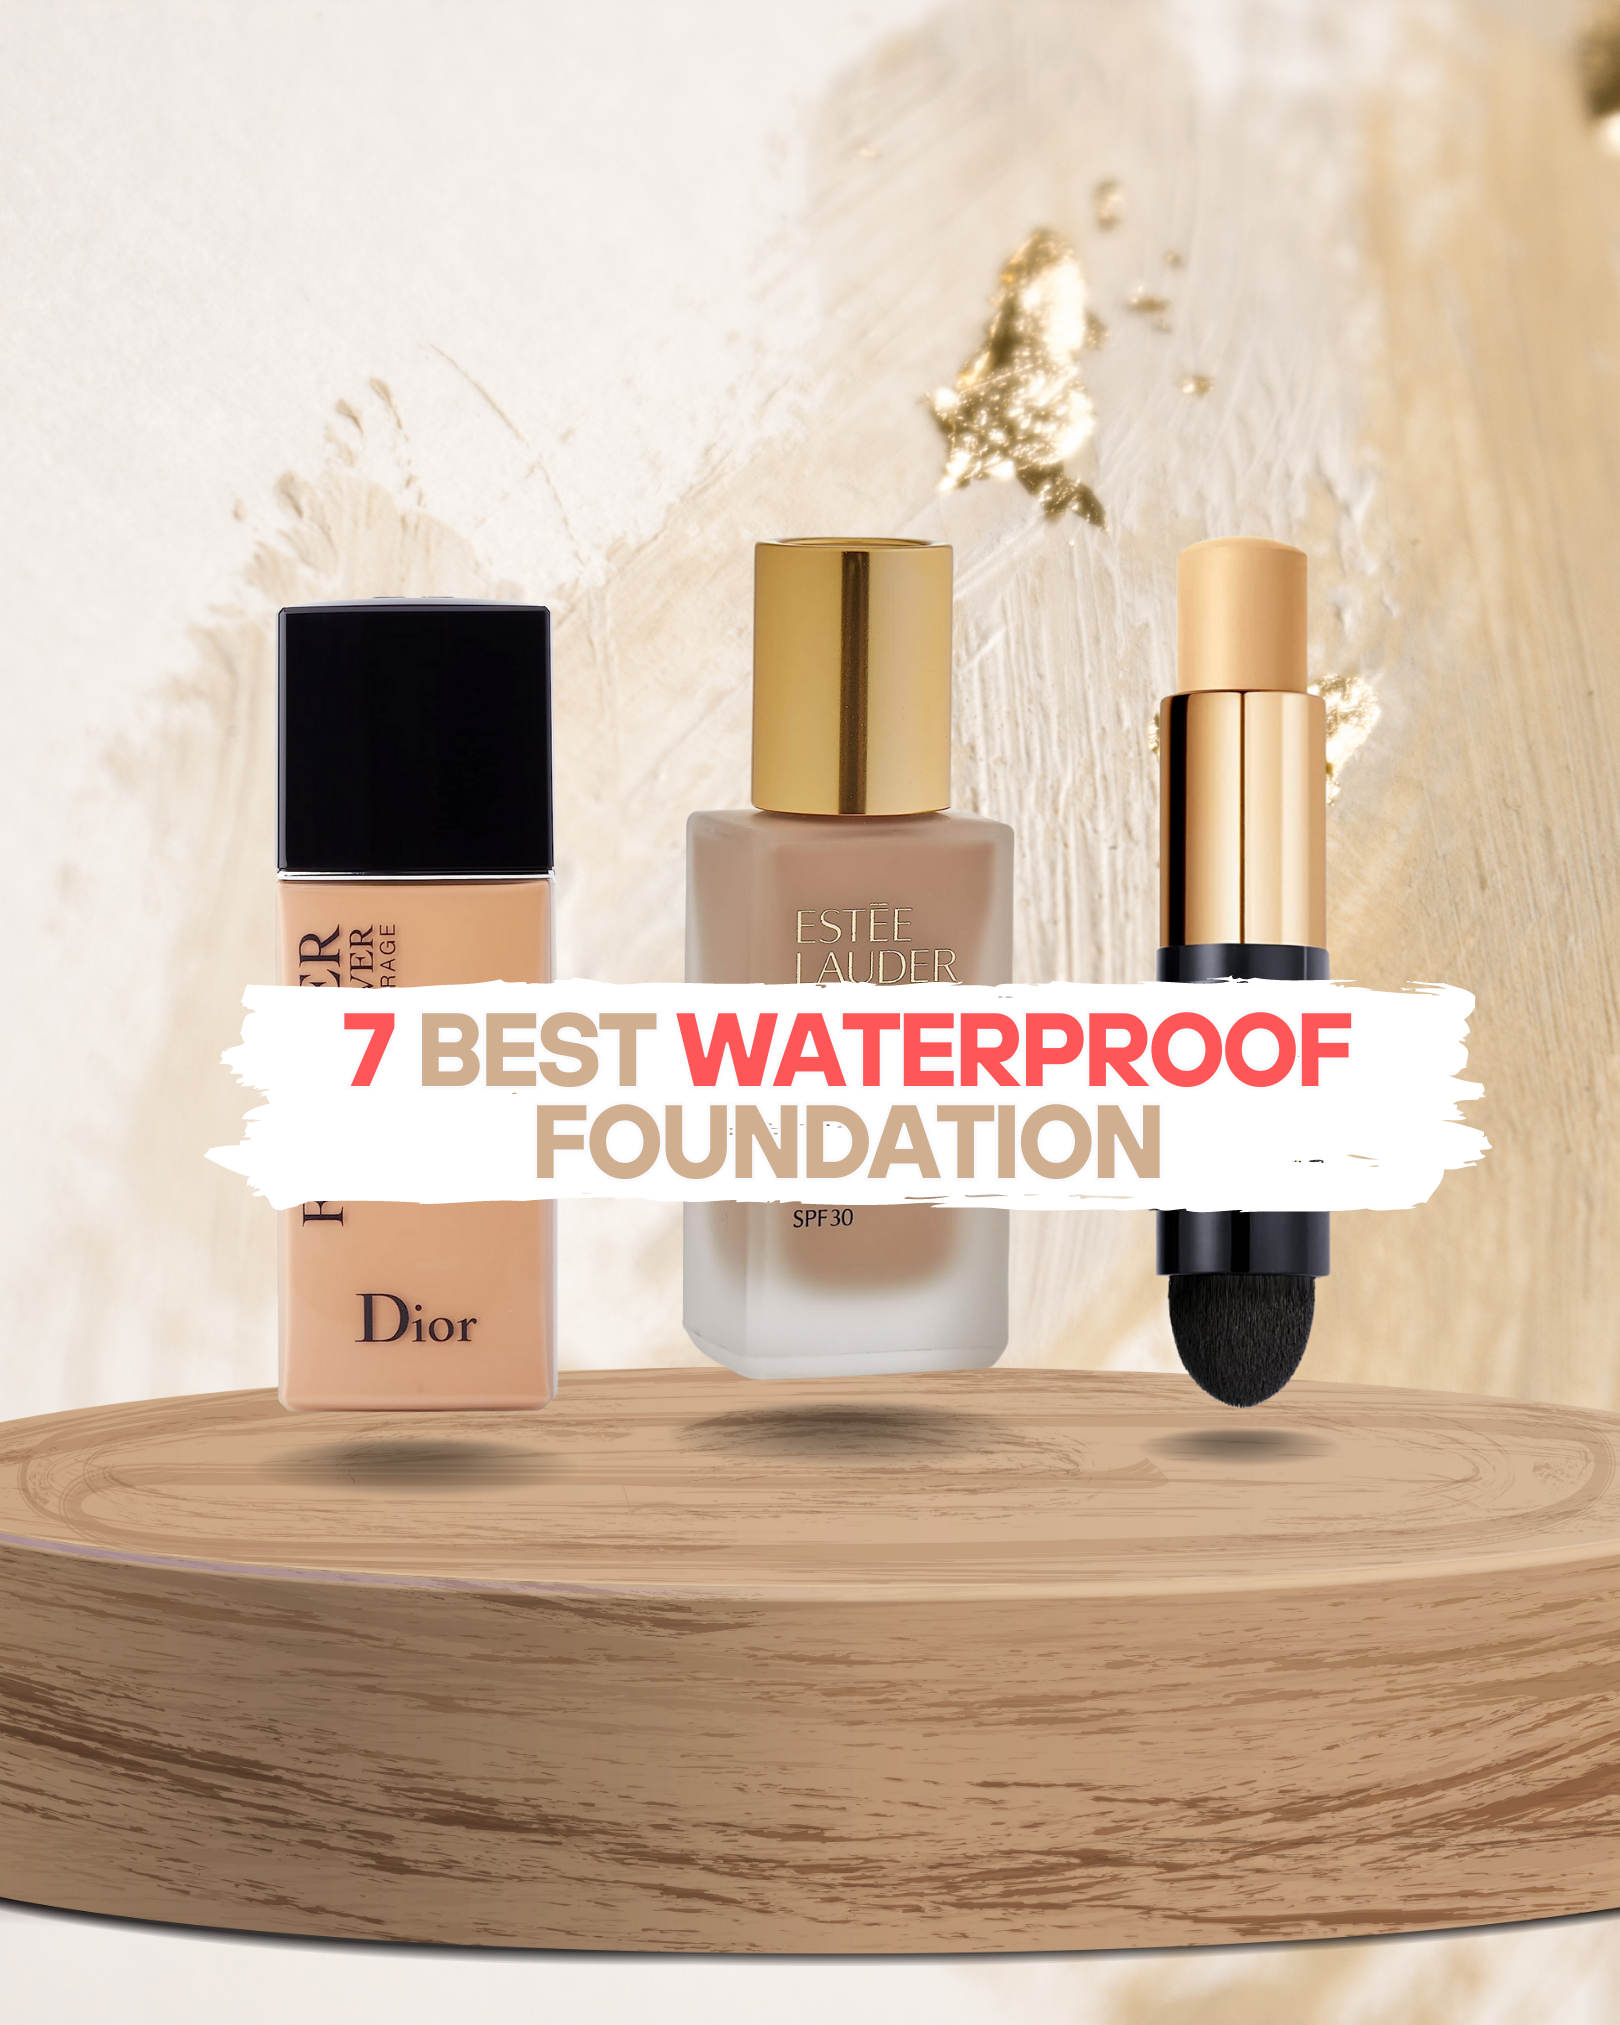 7 Best Waterproof Foundations for Swimming | Best Life Reviews